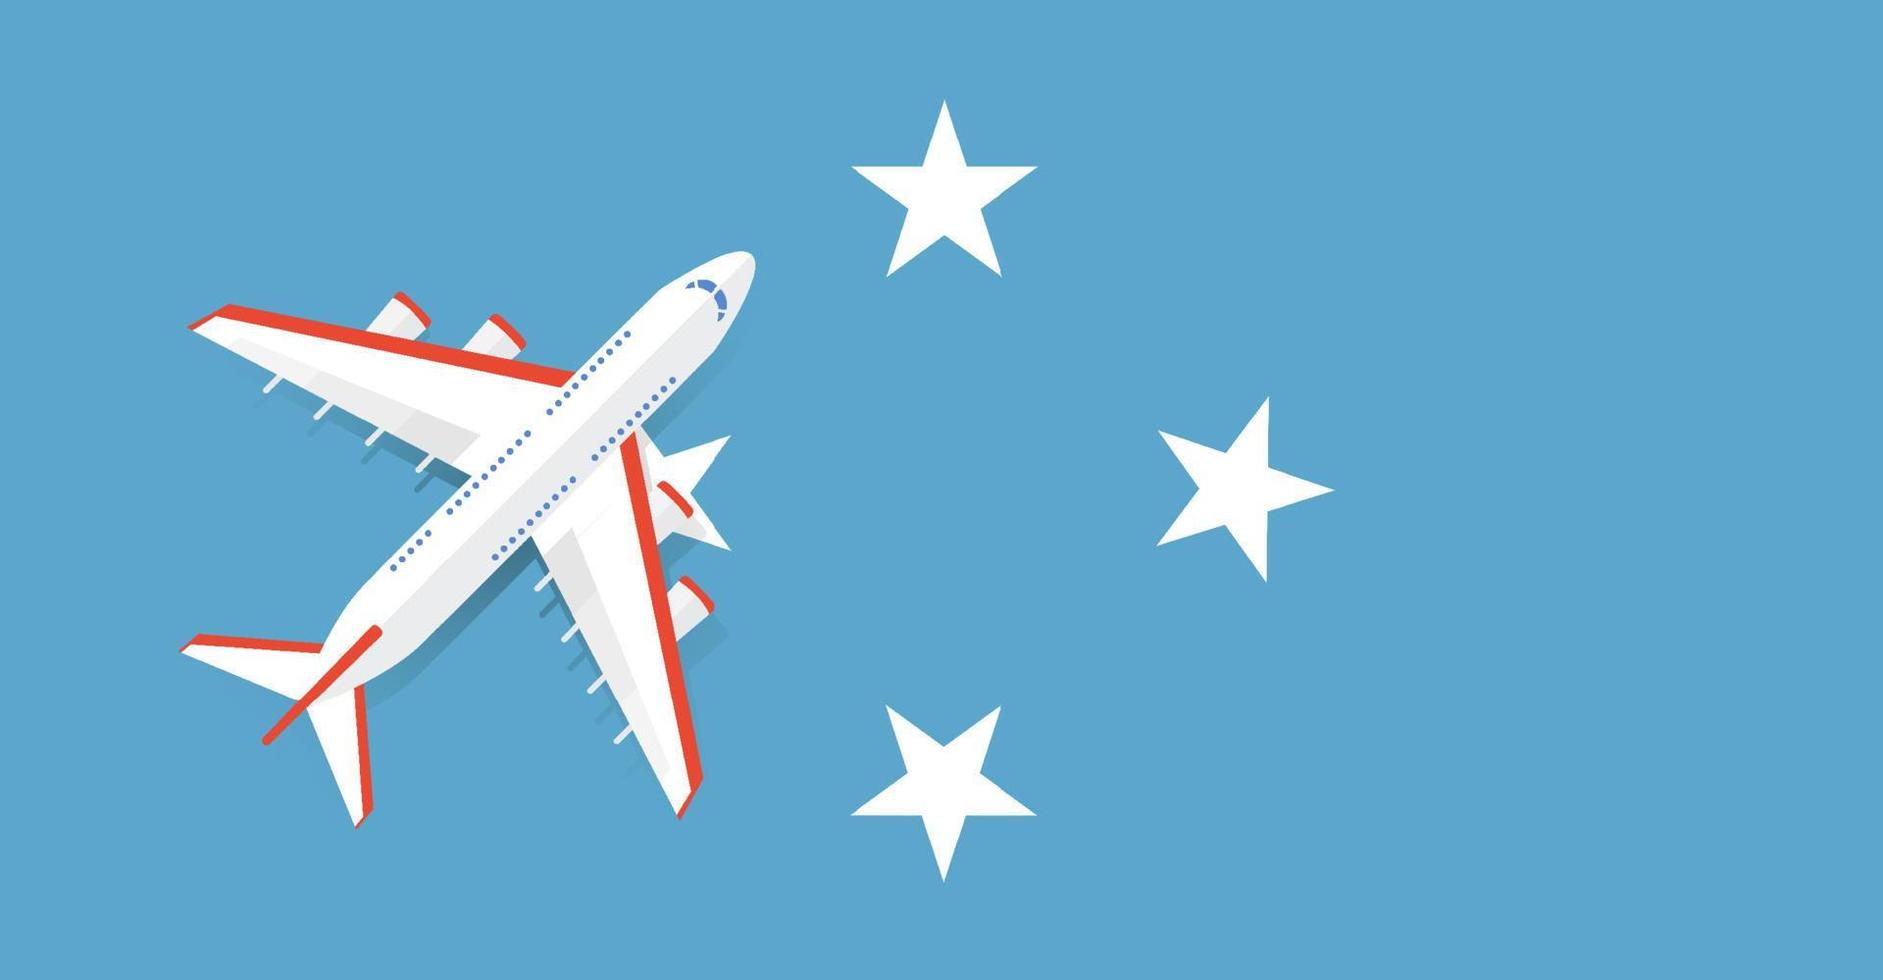 Vector Illustration of a passenger plane flying over the flag of the federated States of Micronesia. Concept of tourism and travel